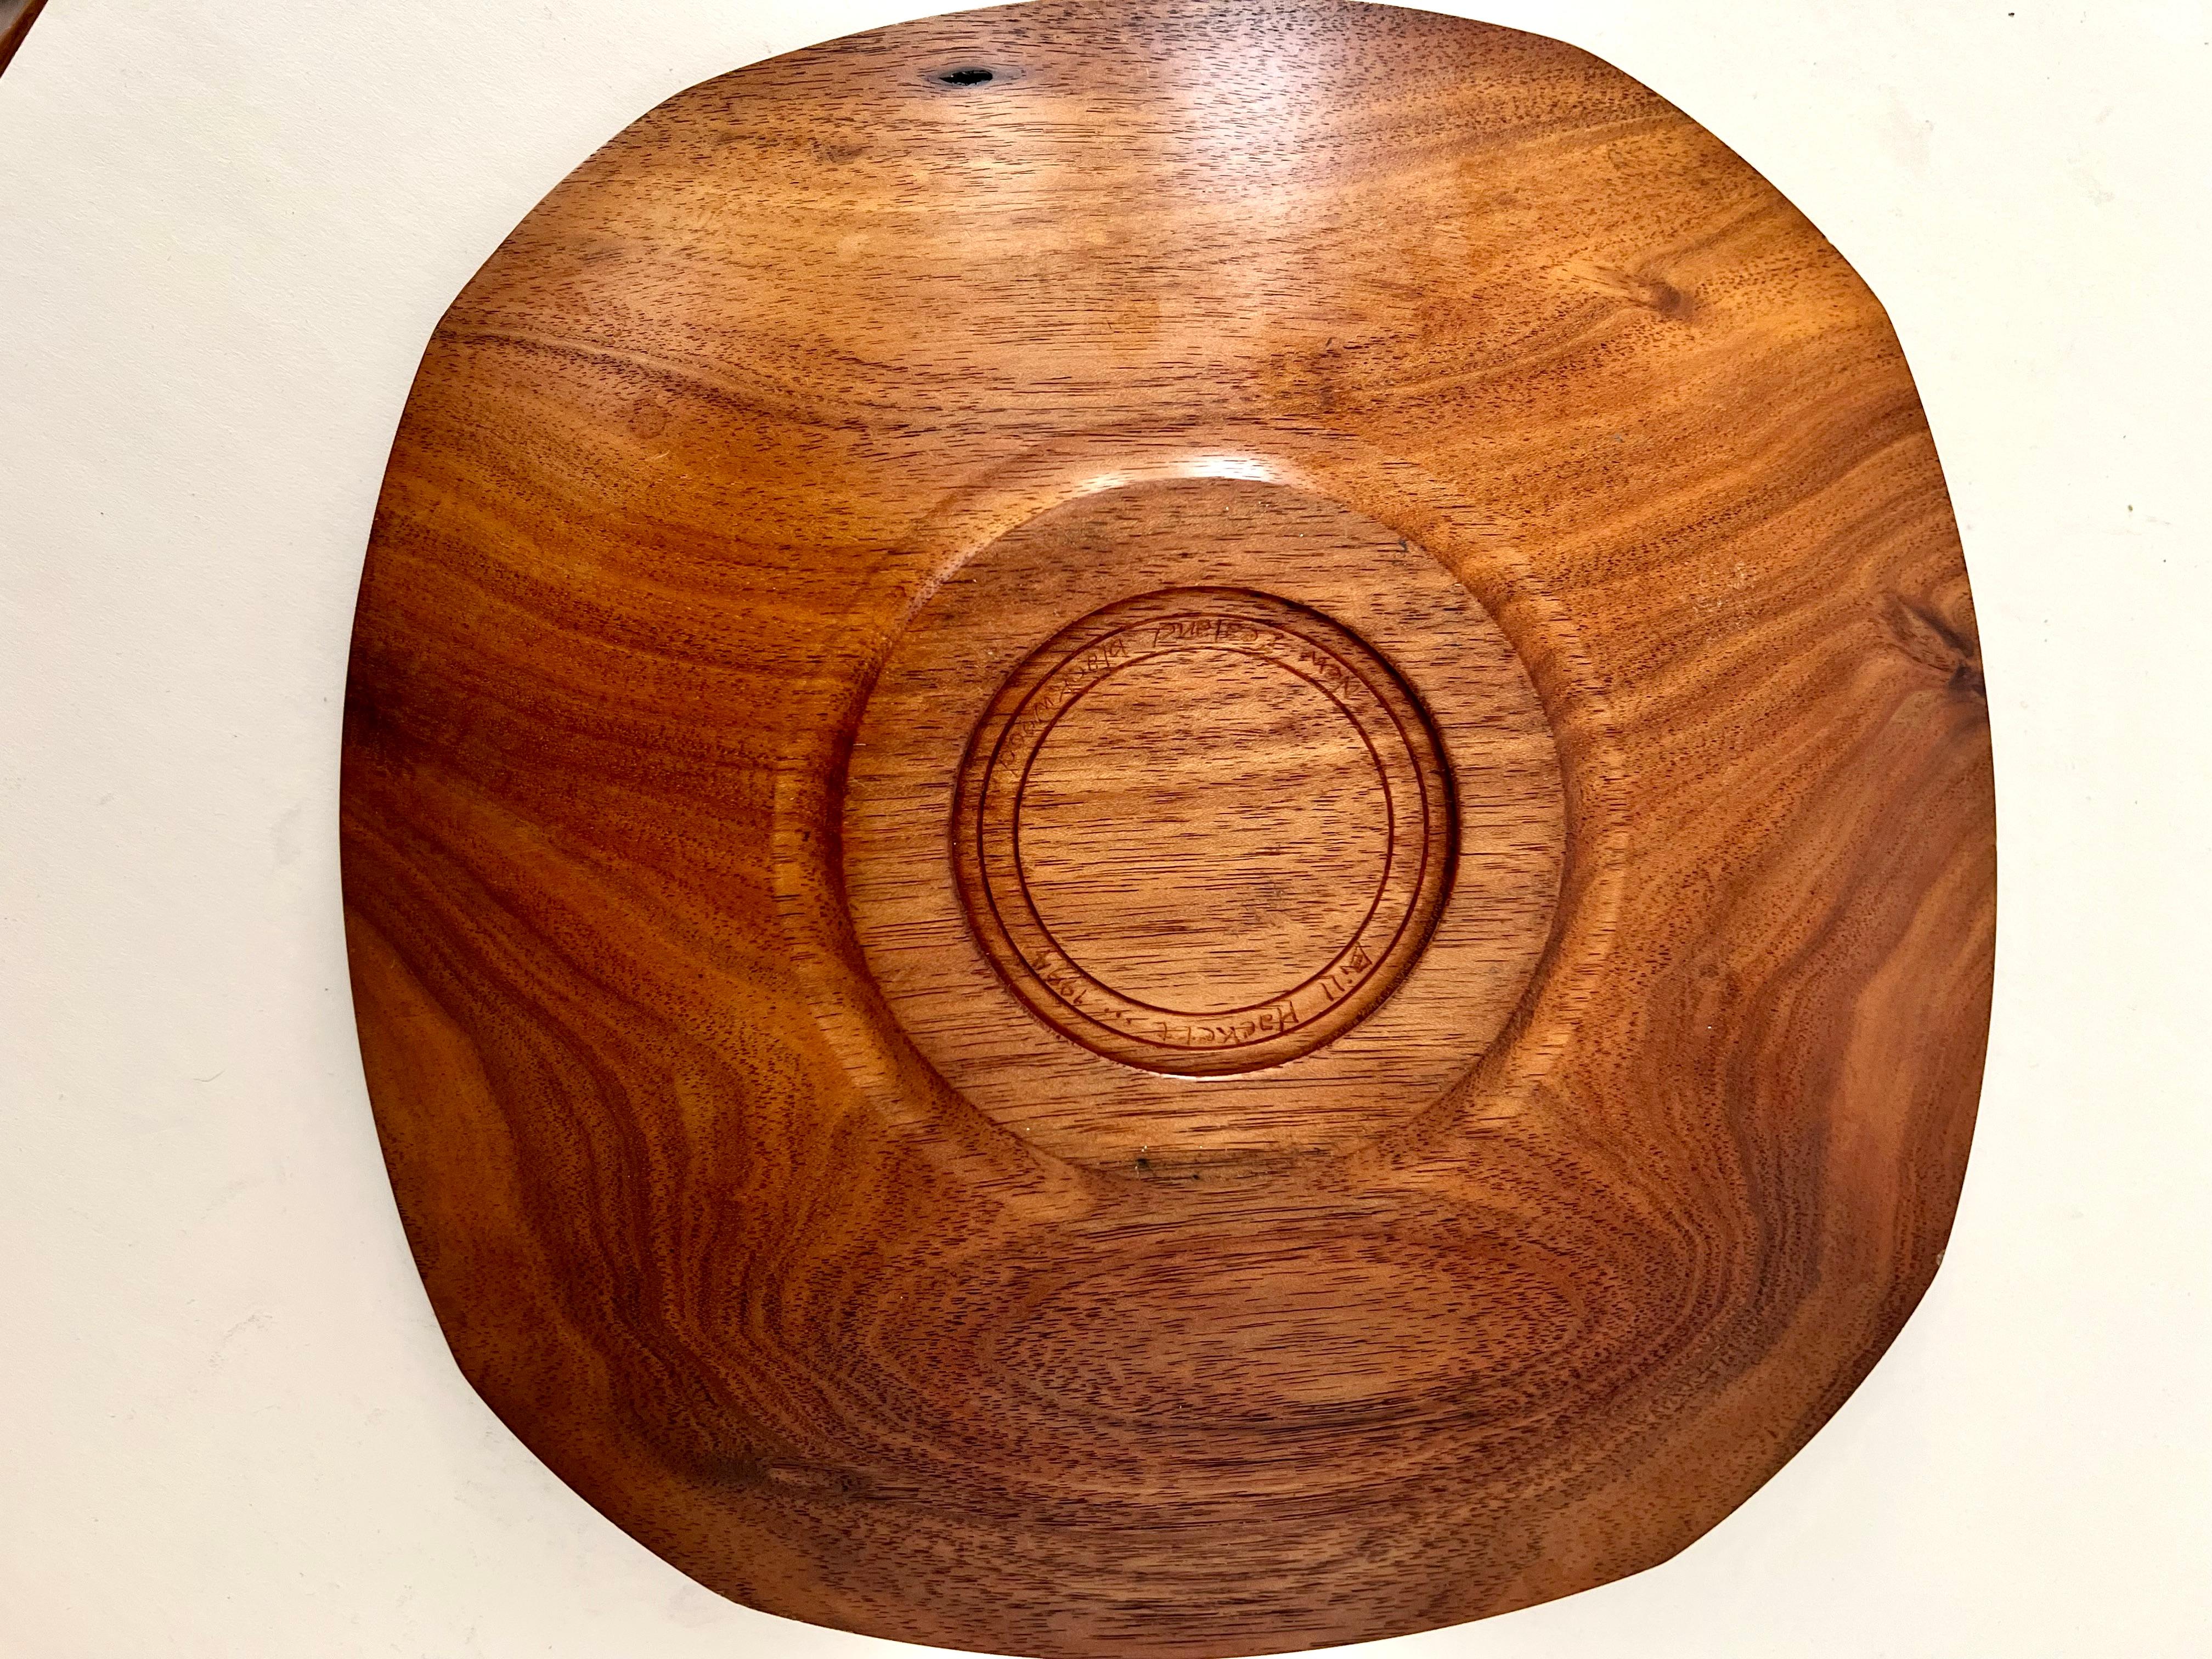 Signed Handmade New Zealand Blackwood Bowl with Rough Hewn Edges For Sale 1